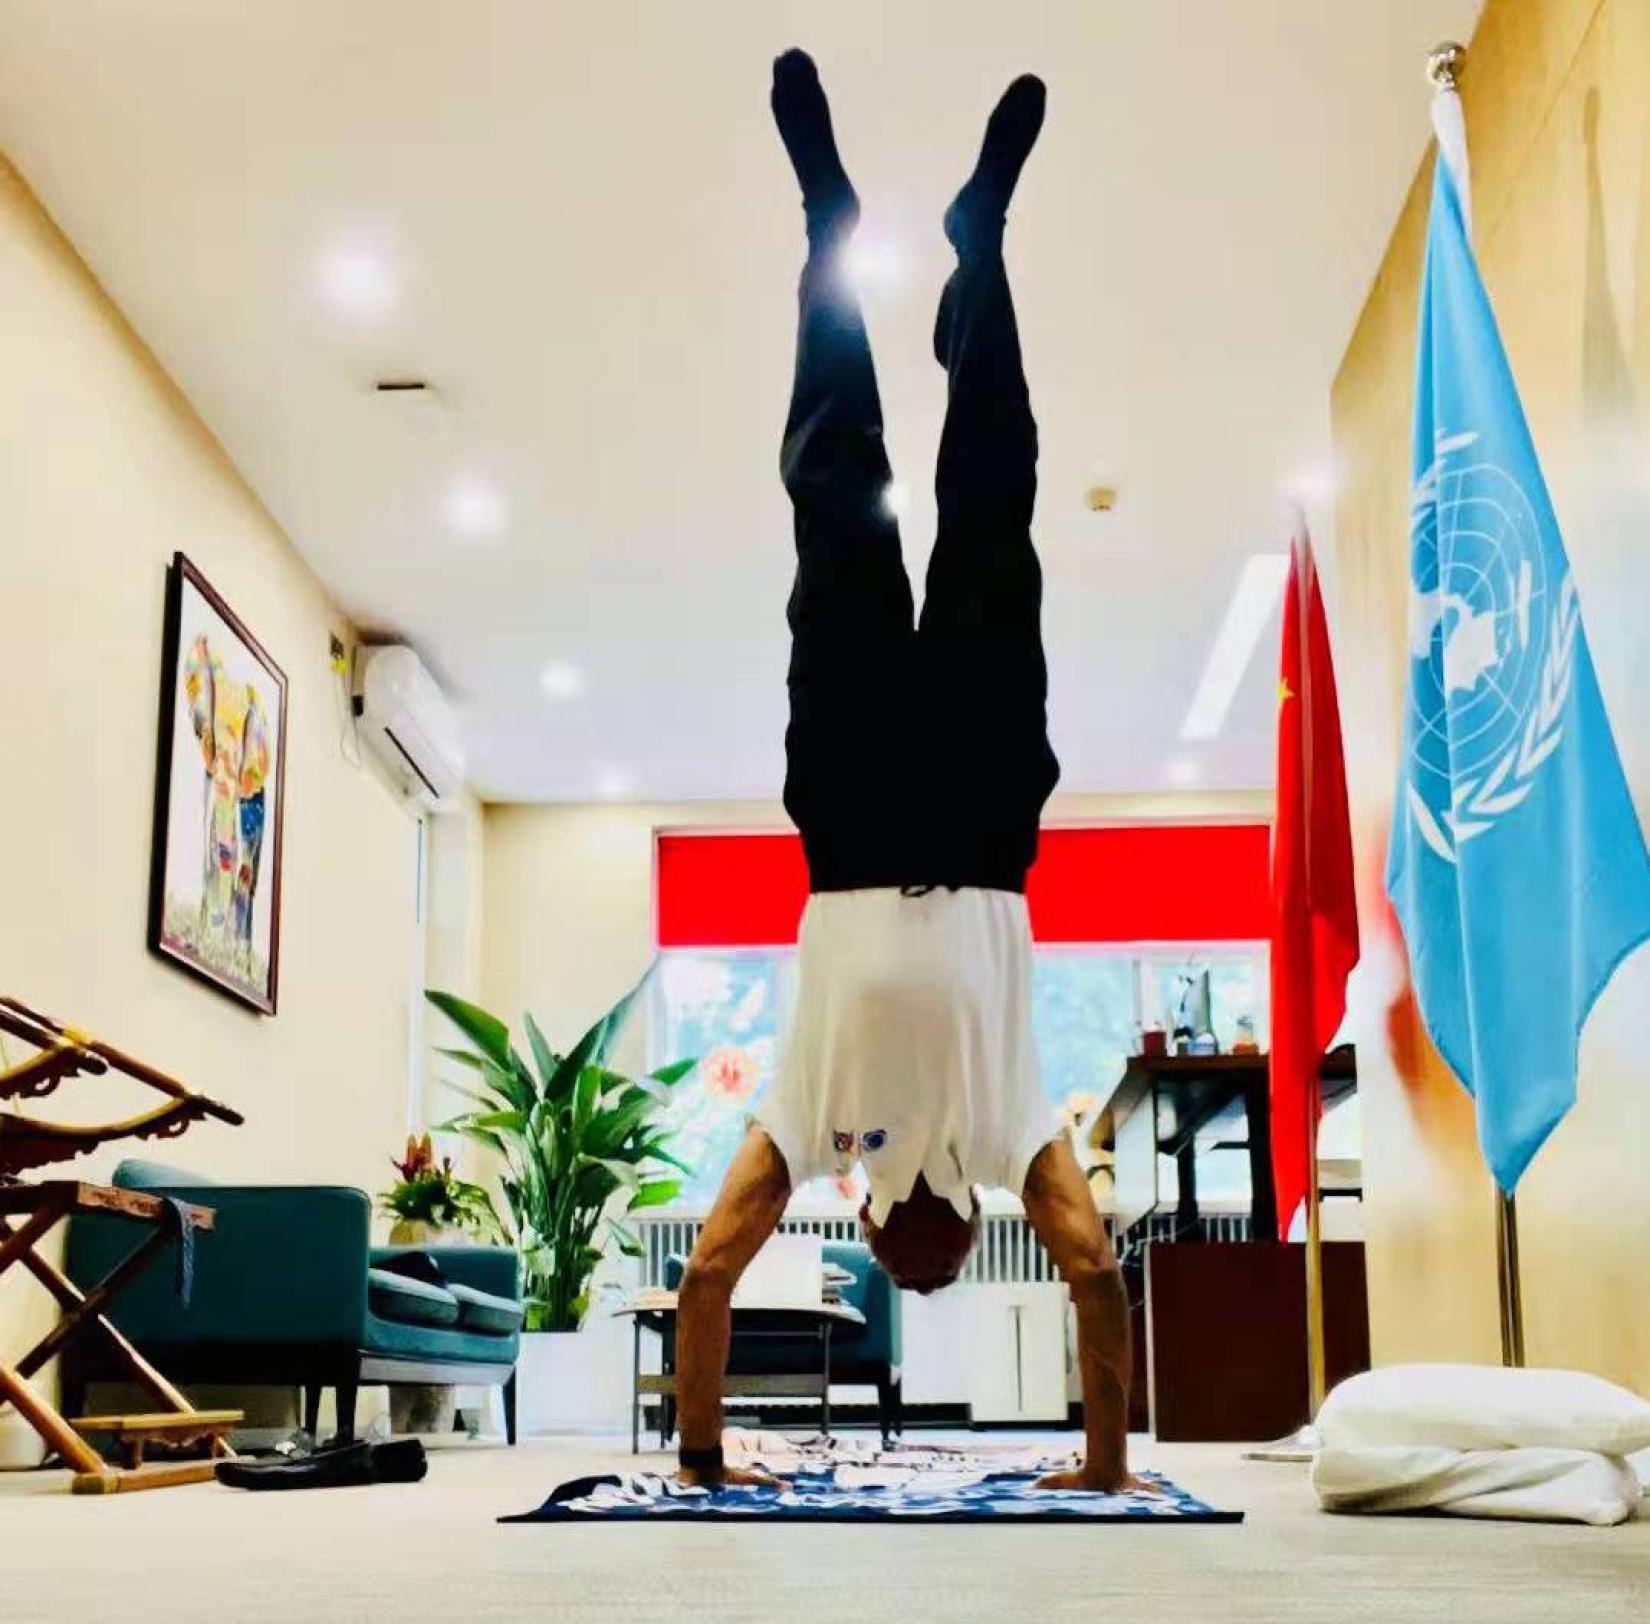 Caption- Siddharth Chatterjee (pictured) practising yoga in his office.